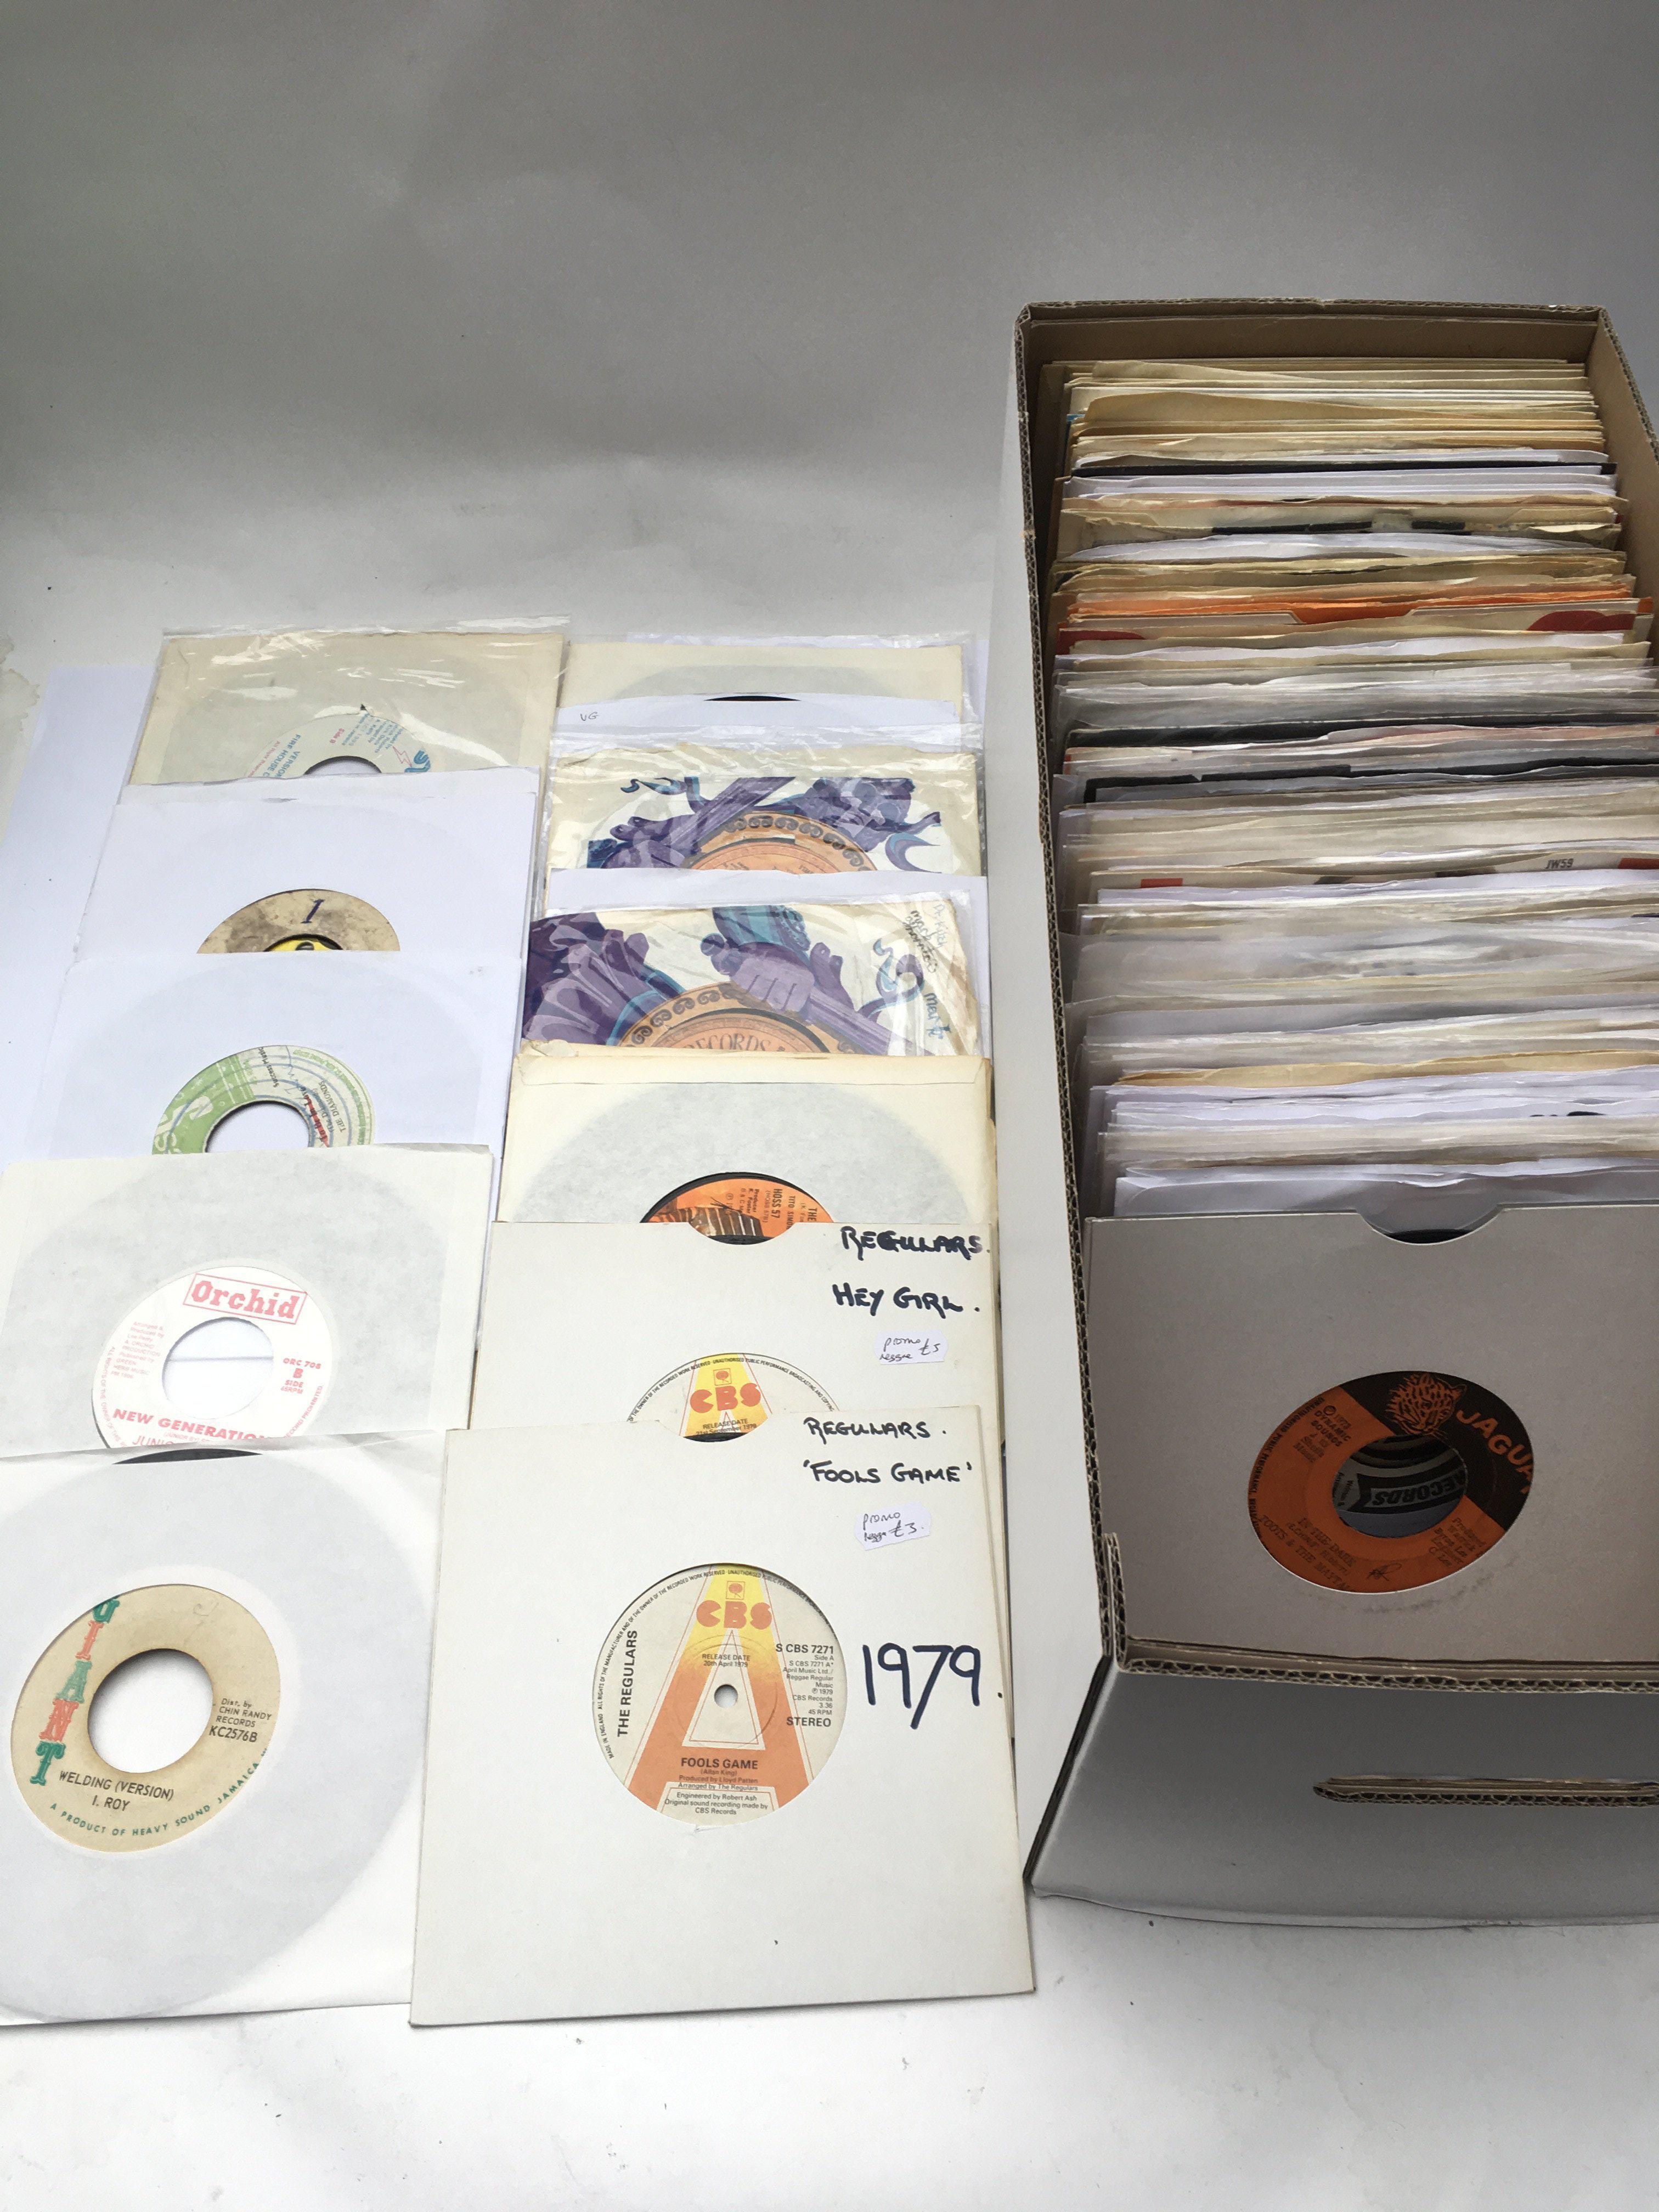 Approx 200 reggae 7inch singles, various artists i